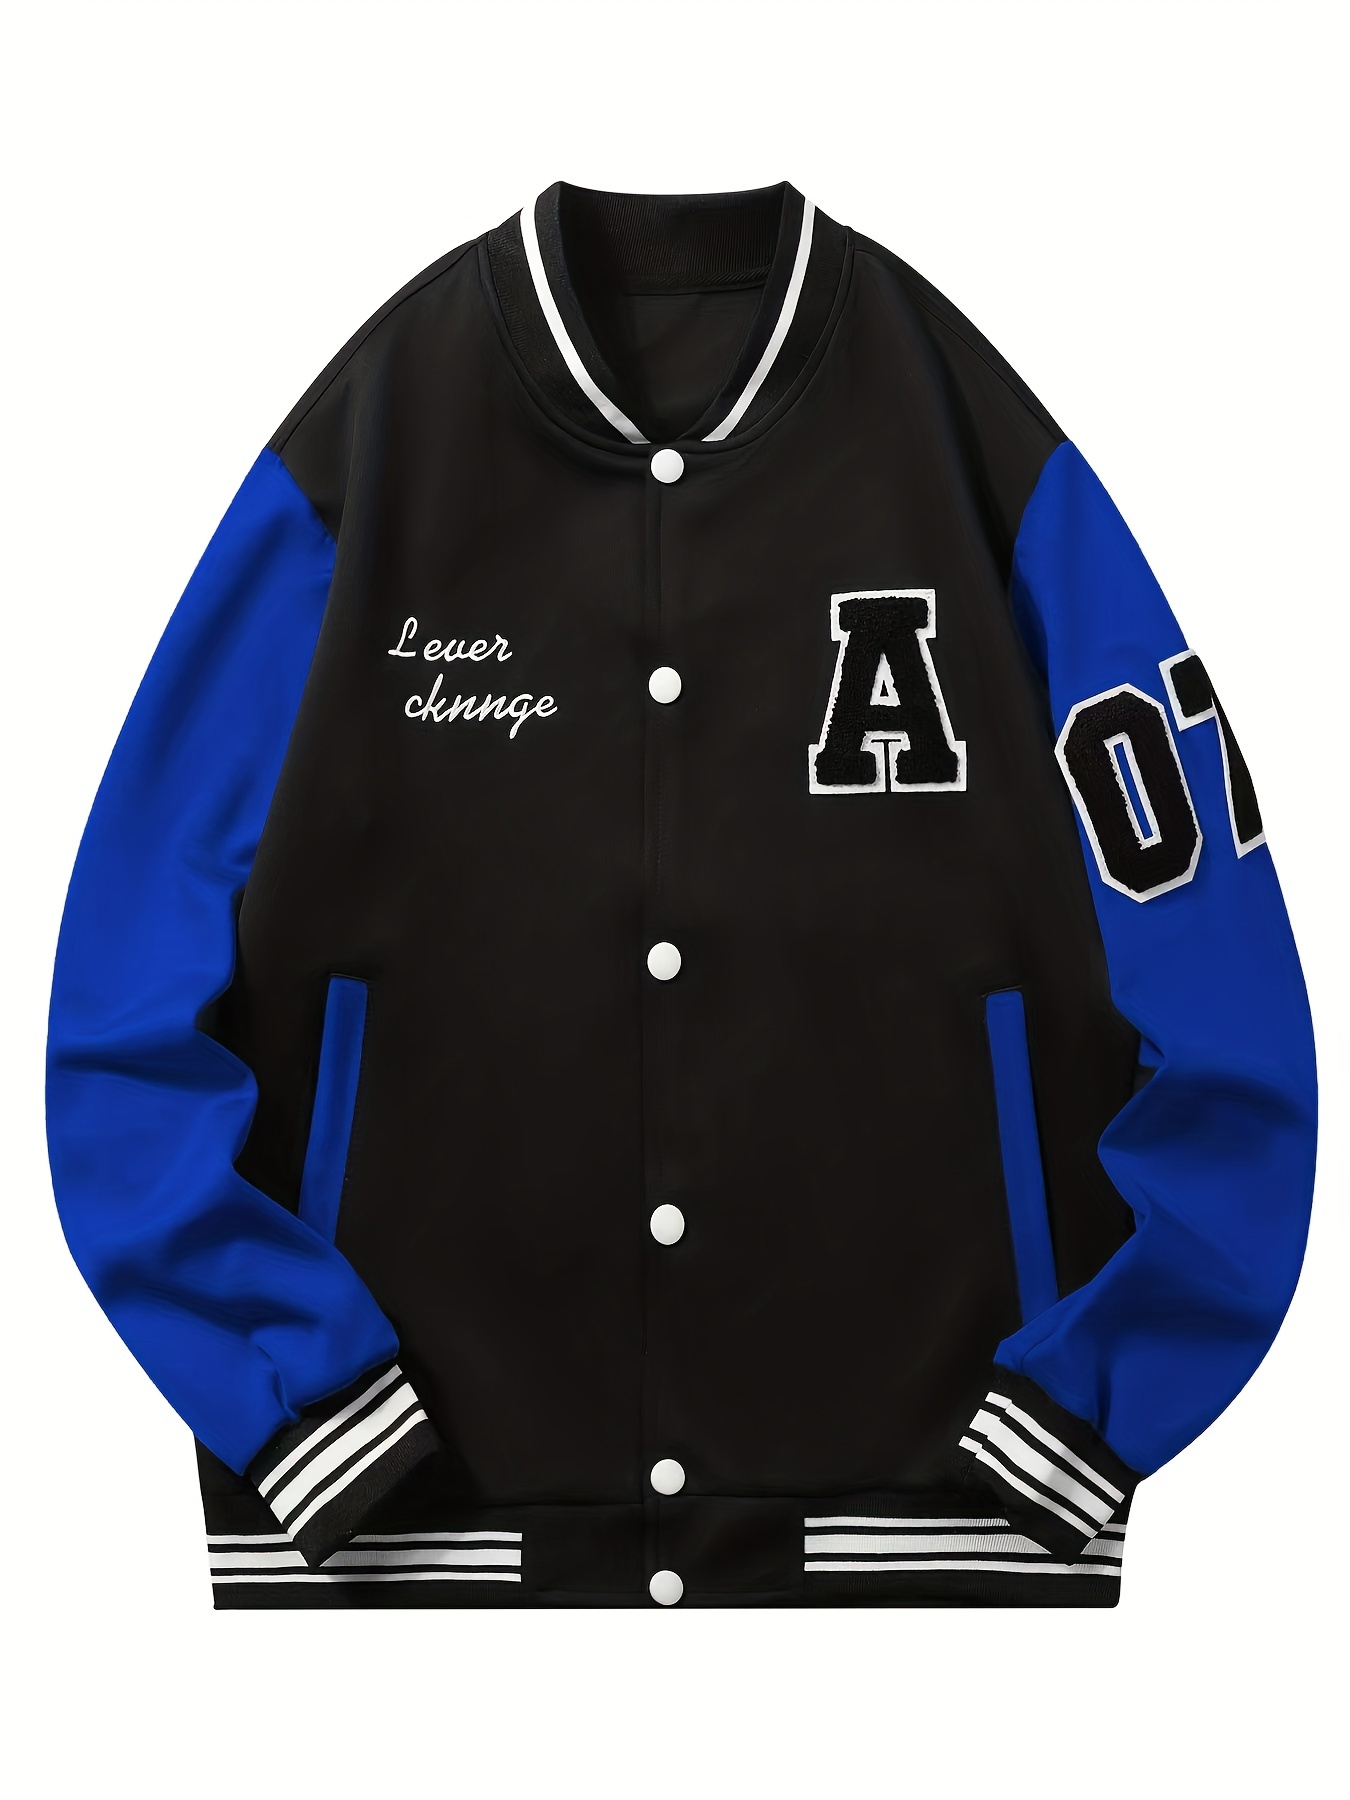 Blue Varsity Jacket Outfits For Men (115 ideas & outfits)